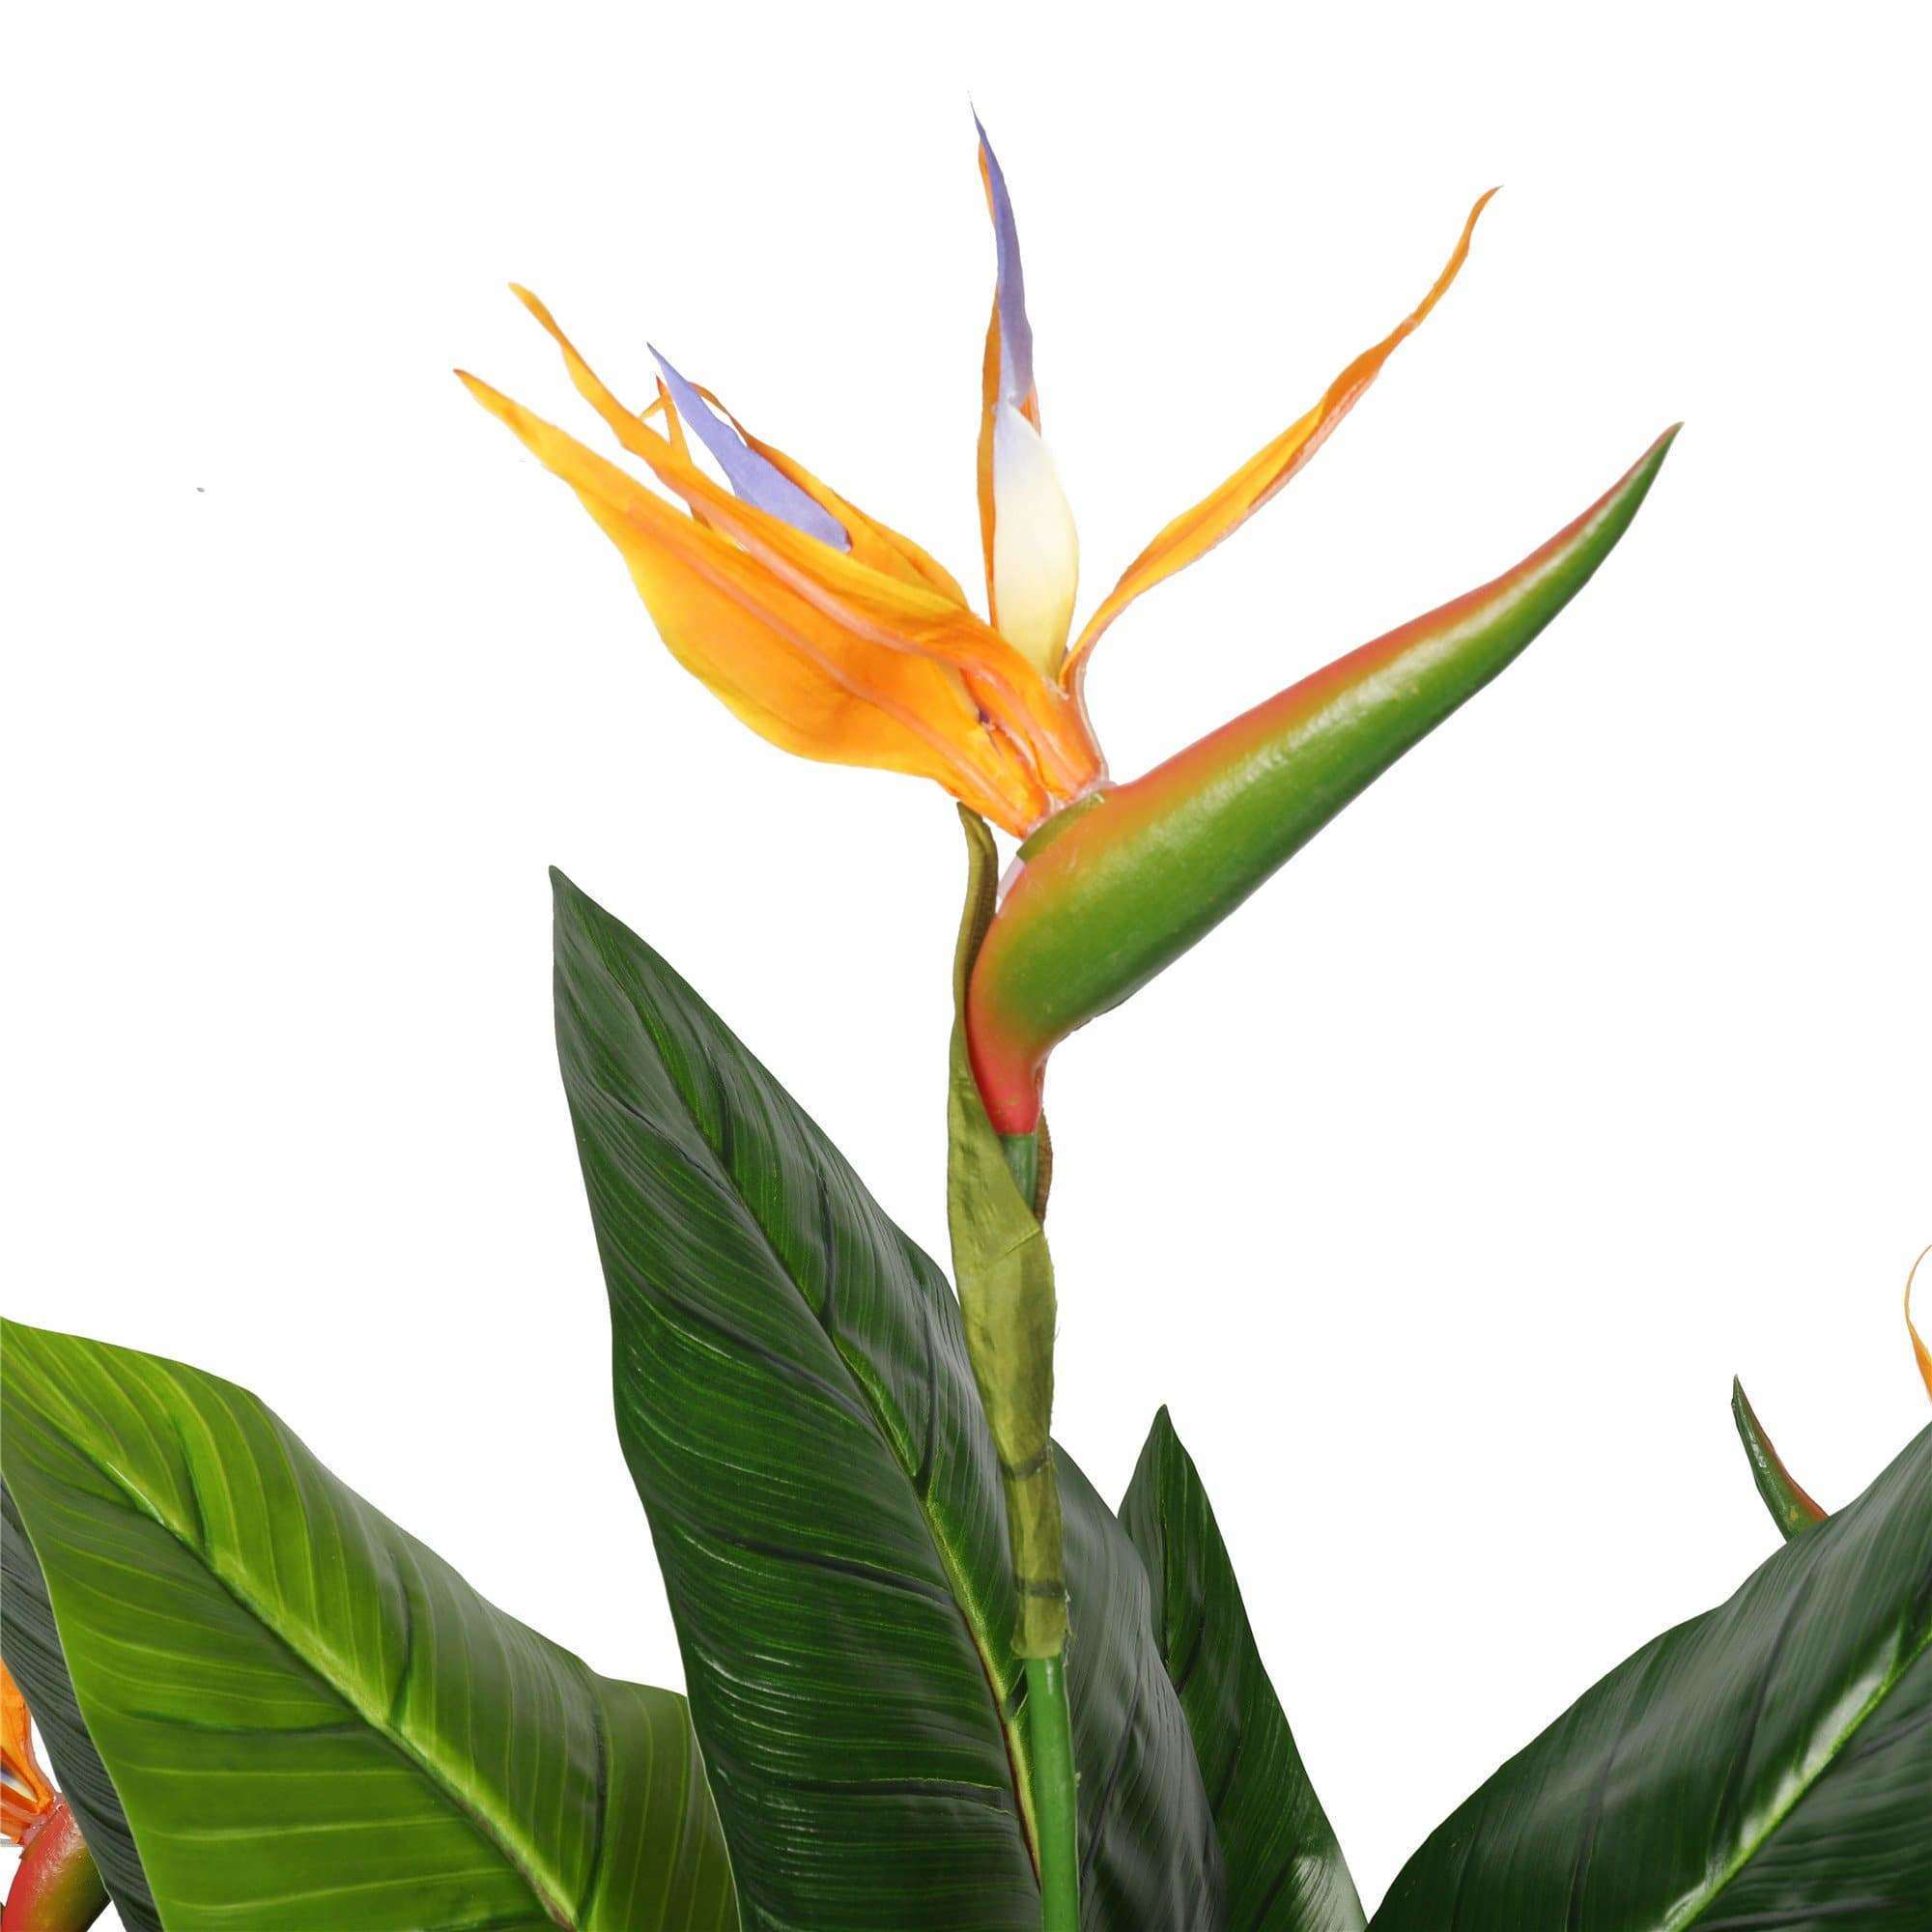 Potted Artificial Bird of Paradise Plant 150cm - Designer Vertical Gardens Artificial Shrubs and Small plants Flowering plants